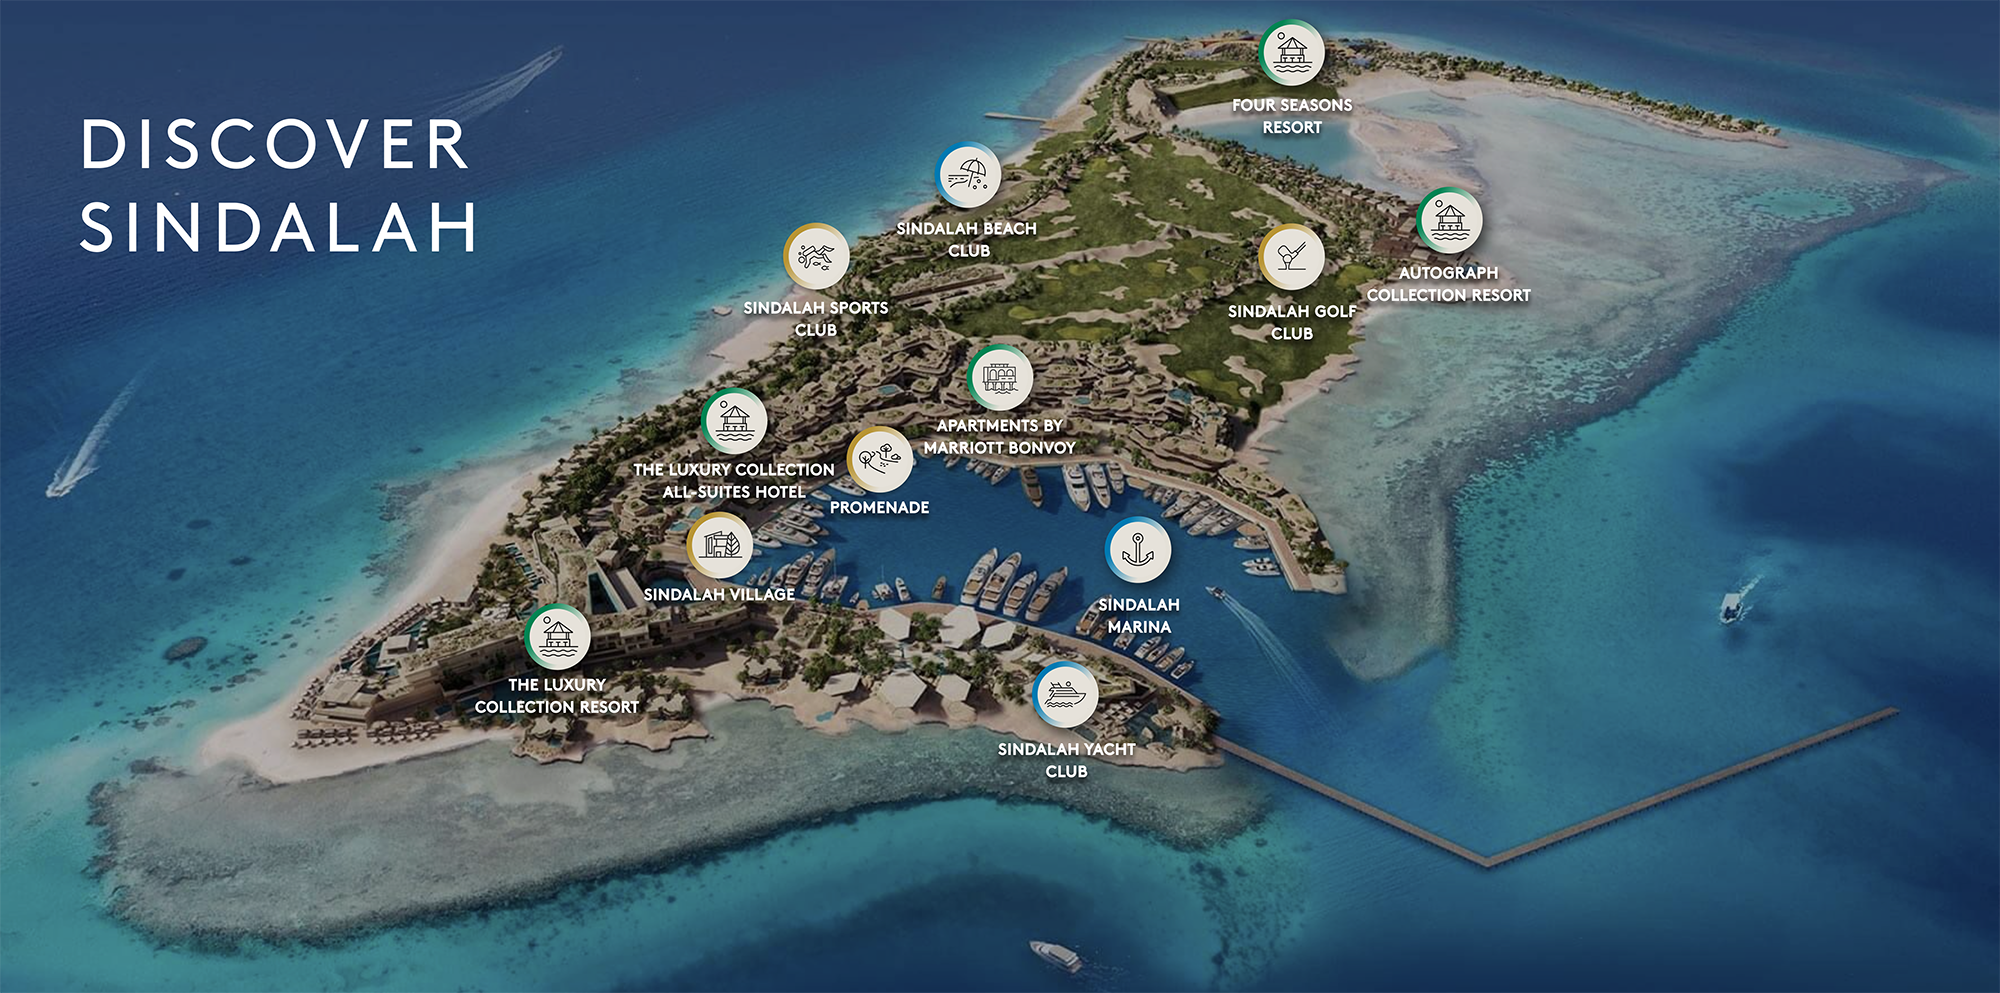 A map of Sindalah Island, a luxury island destination in the Red Sea, showing various amenities